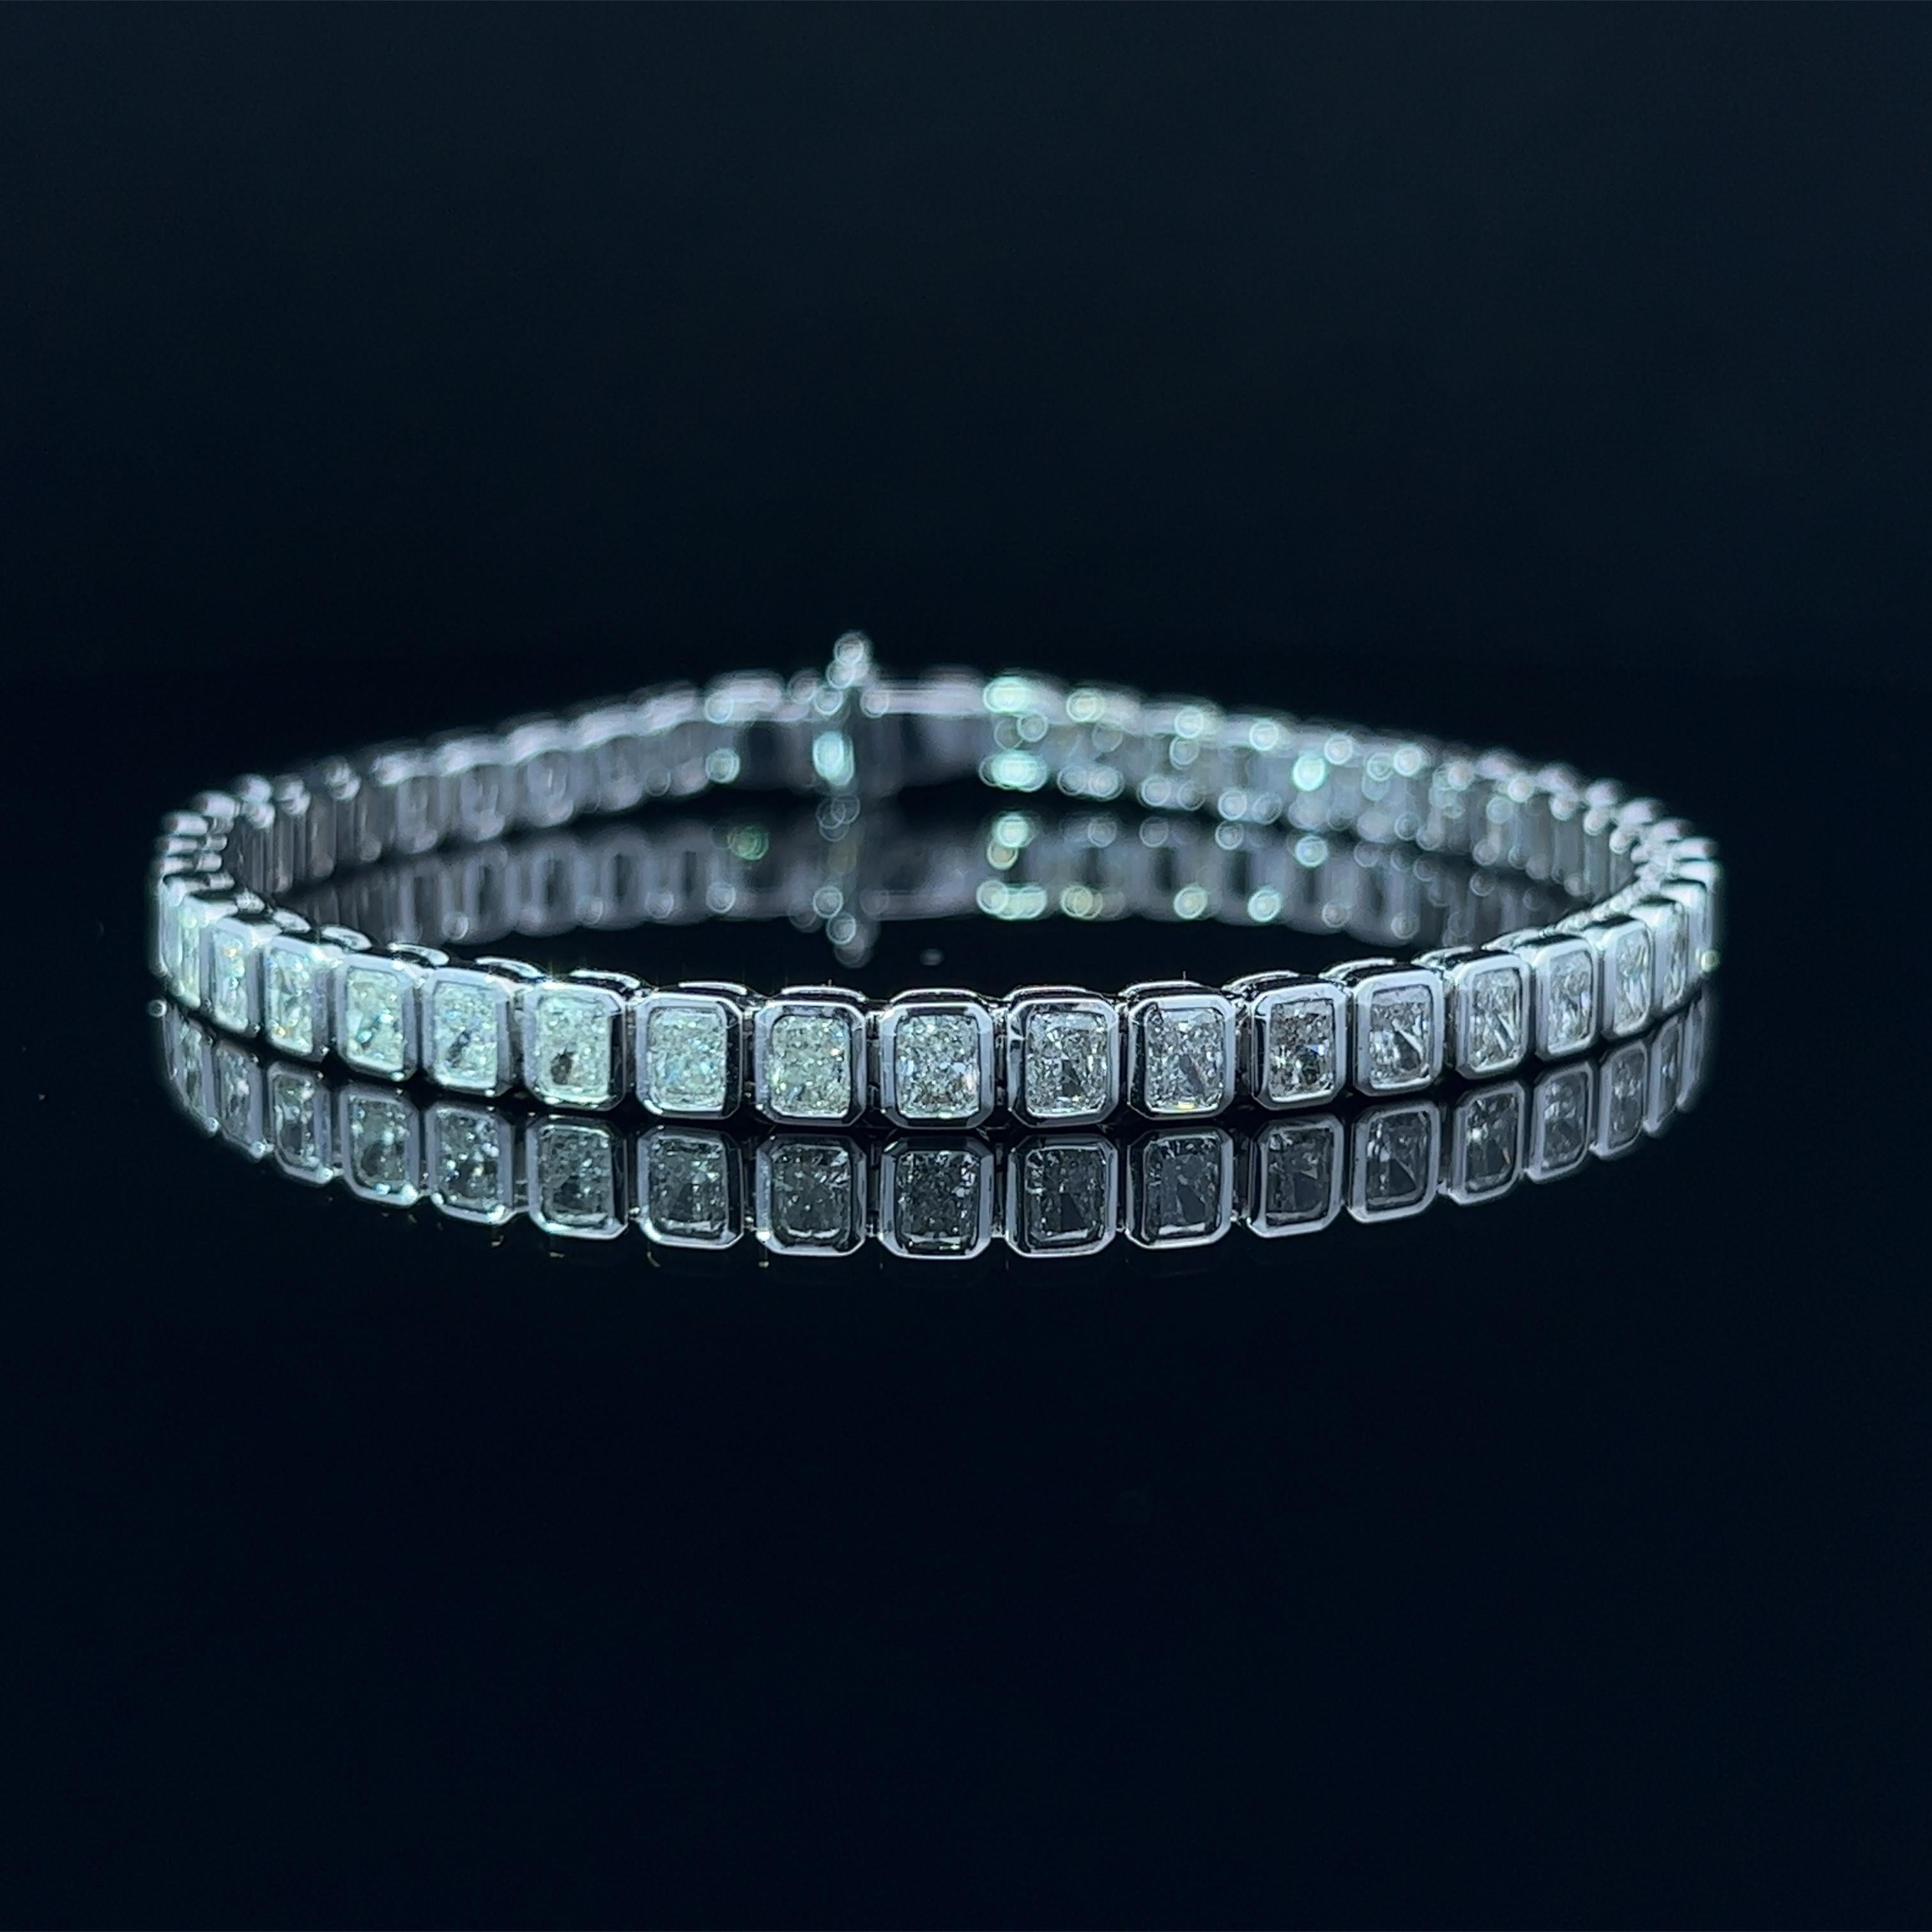 Diamond Shape: Radiant Cut 
Total Diamond Weight: 6.65ct
Individual Diamond Weight: .15ct
Color/Clarity: GH VVS  
Metal: 18K White Gold  
Metal Weight: 16.77g 

Key Features:

Radiant-Cut Diamonds: The centerpiece of this bracelet features a